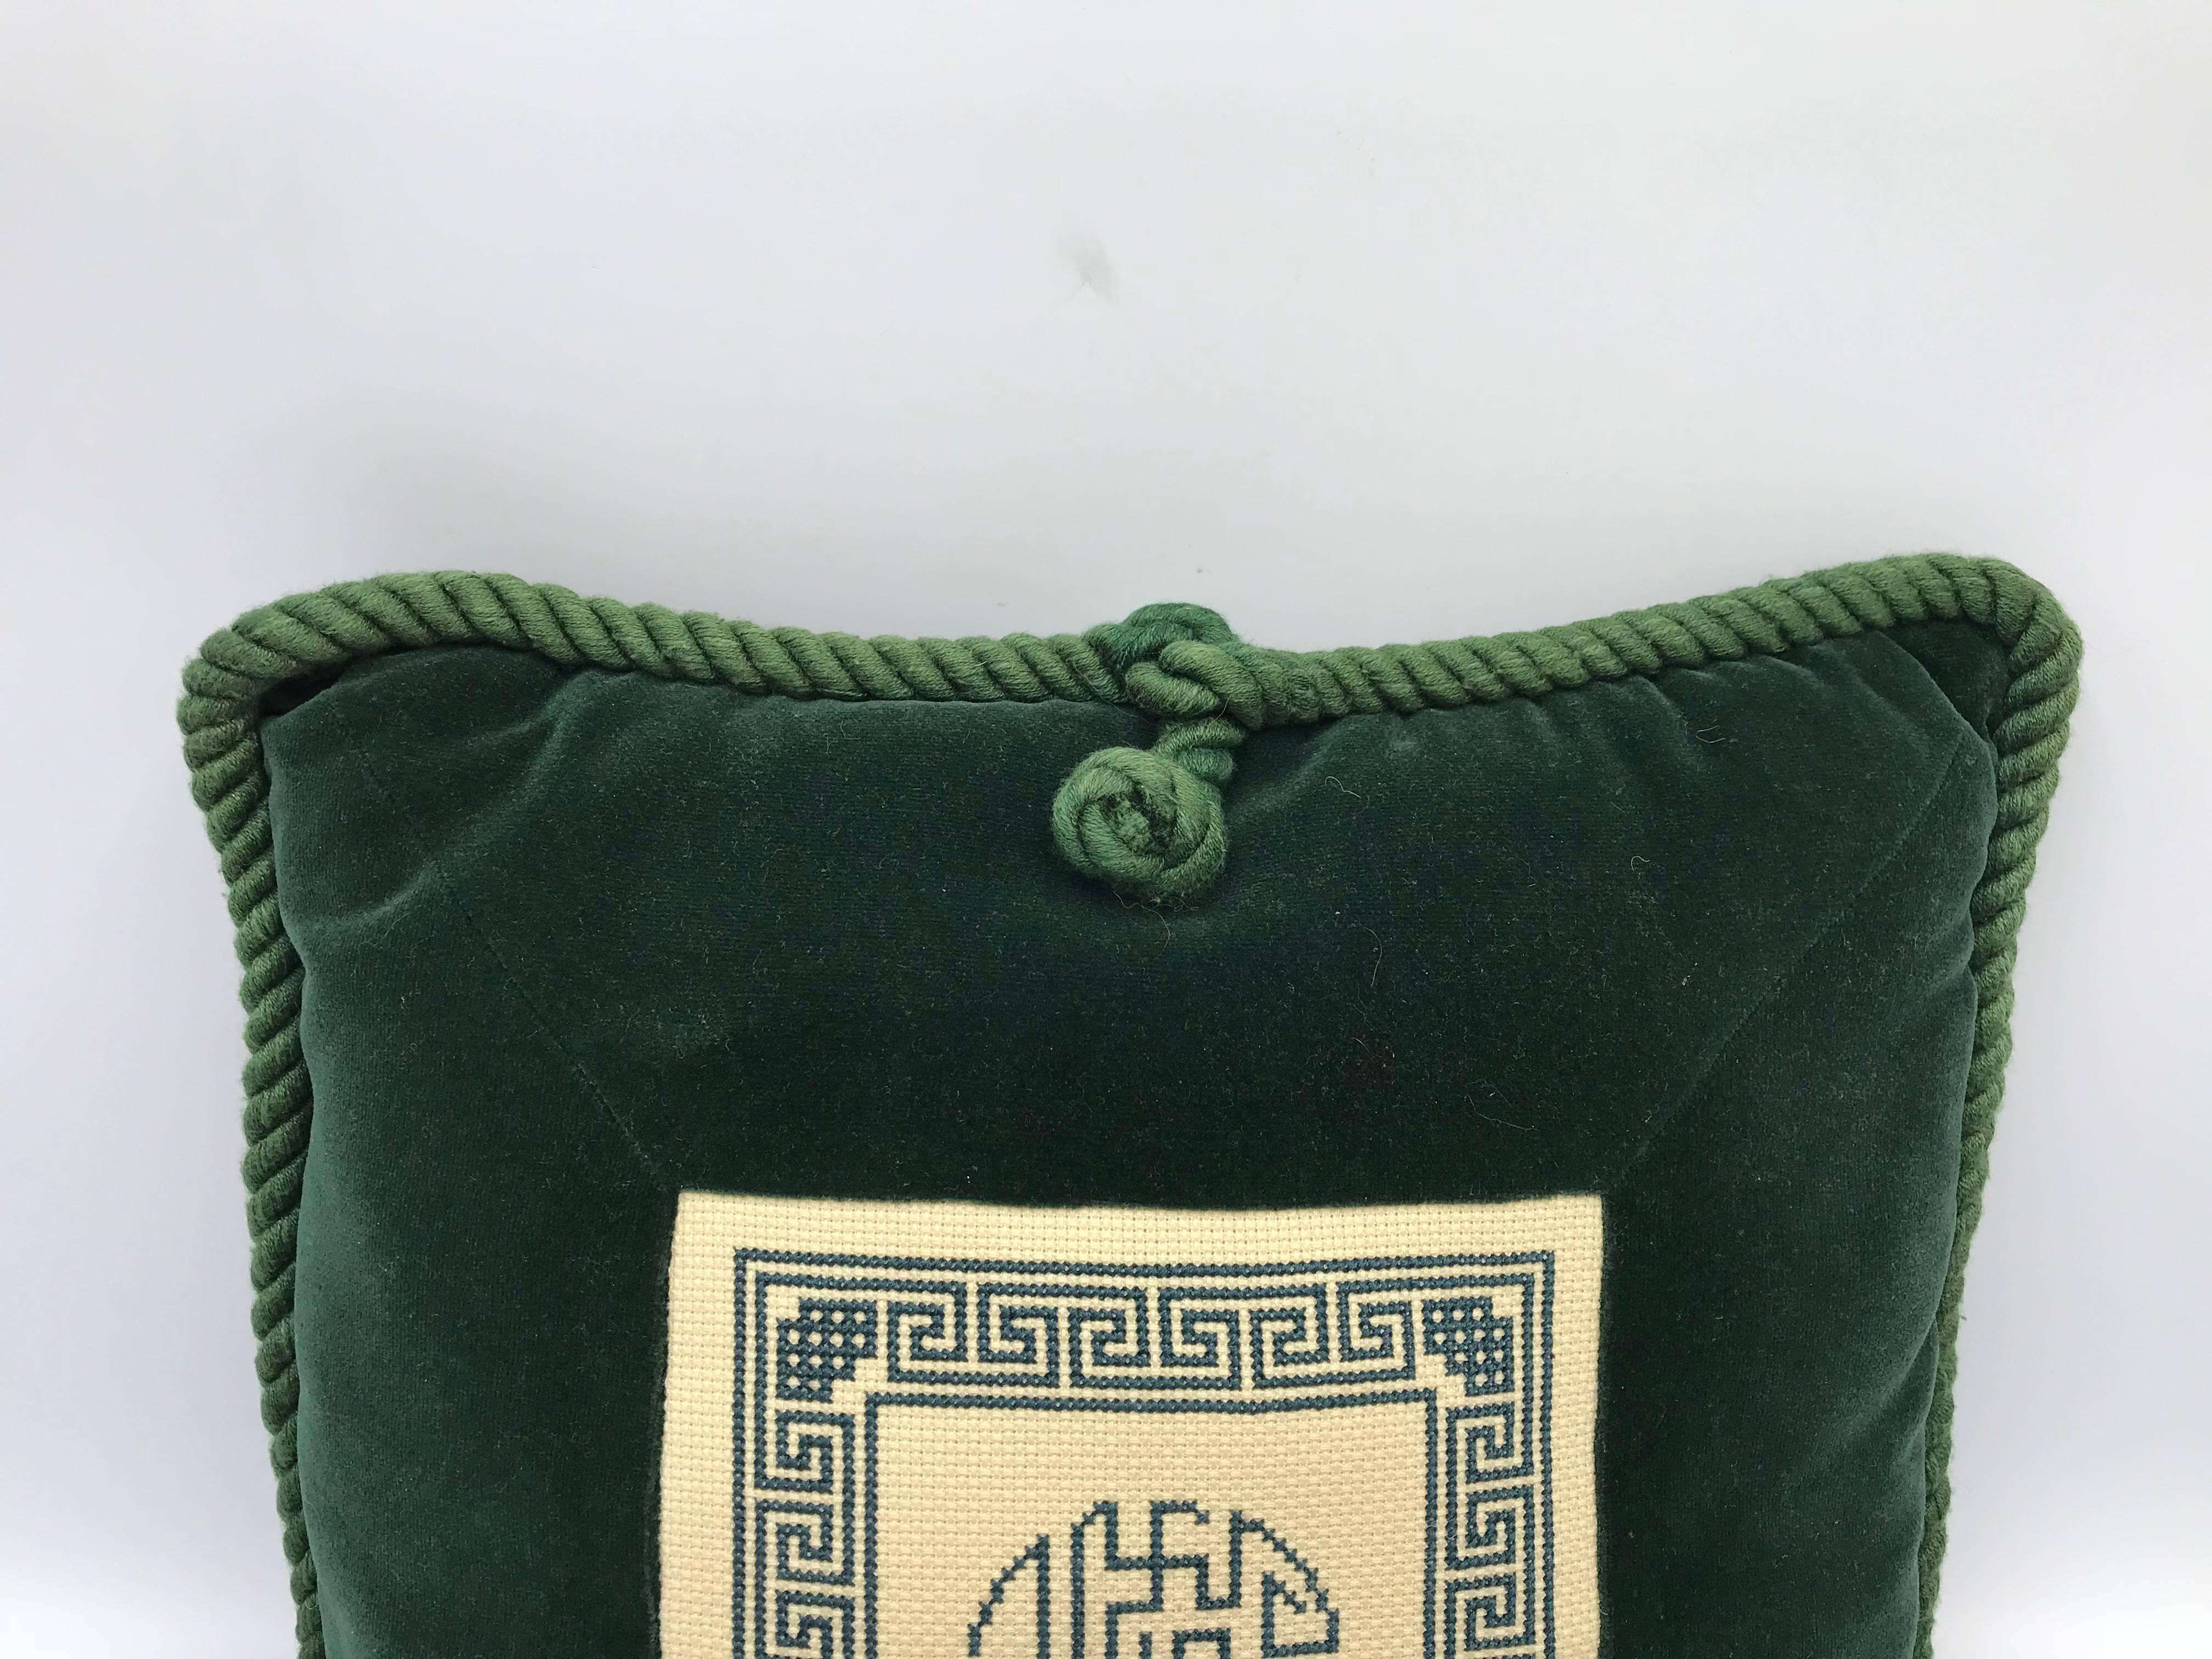 Offered is a fabulous, 1960s chinoiserie throw pillow with a white and green Asian needlepoint motif on green velvet. Matching dark green piping and tassel. Poly-blend fill.